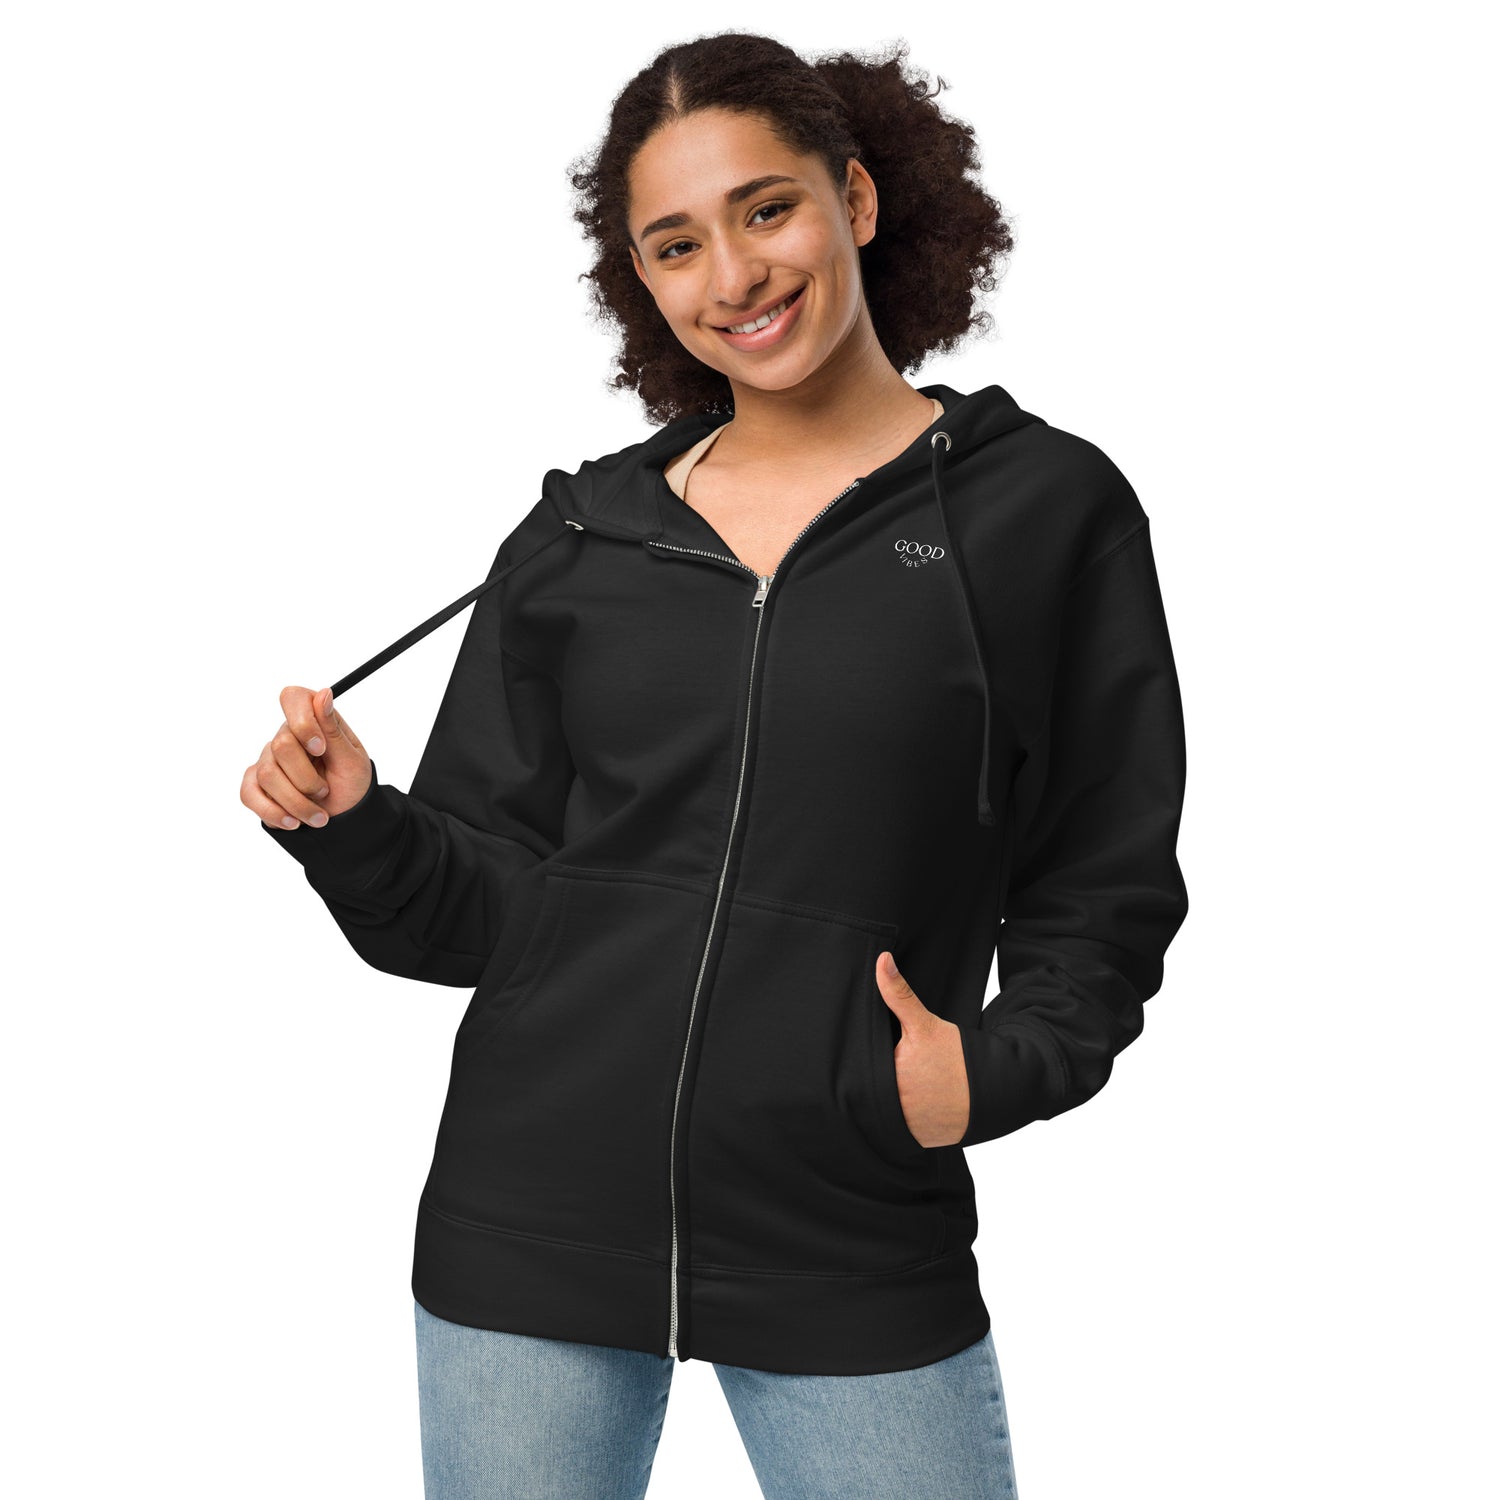 A woman wearing a Black zip up hoodie with a "Good Vibes" printed on chest.